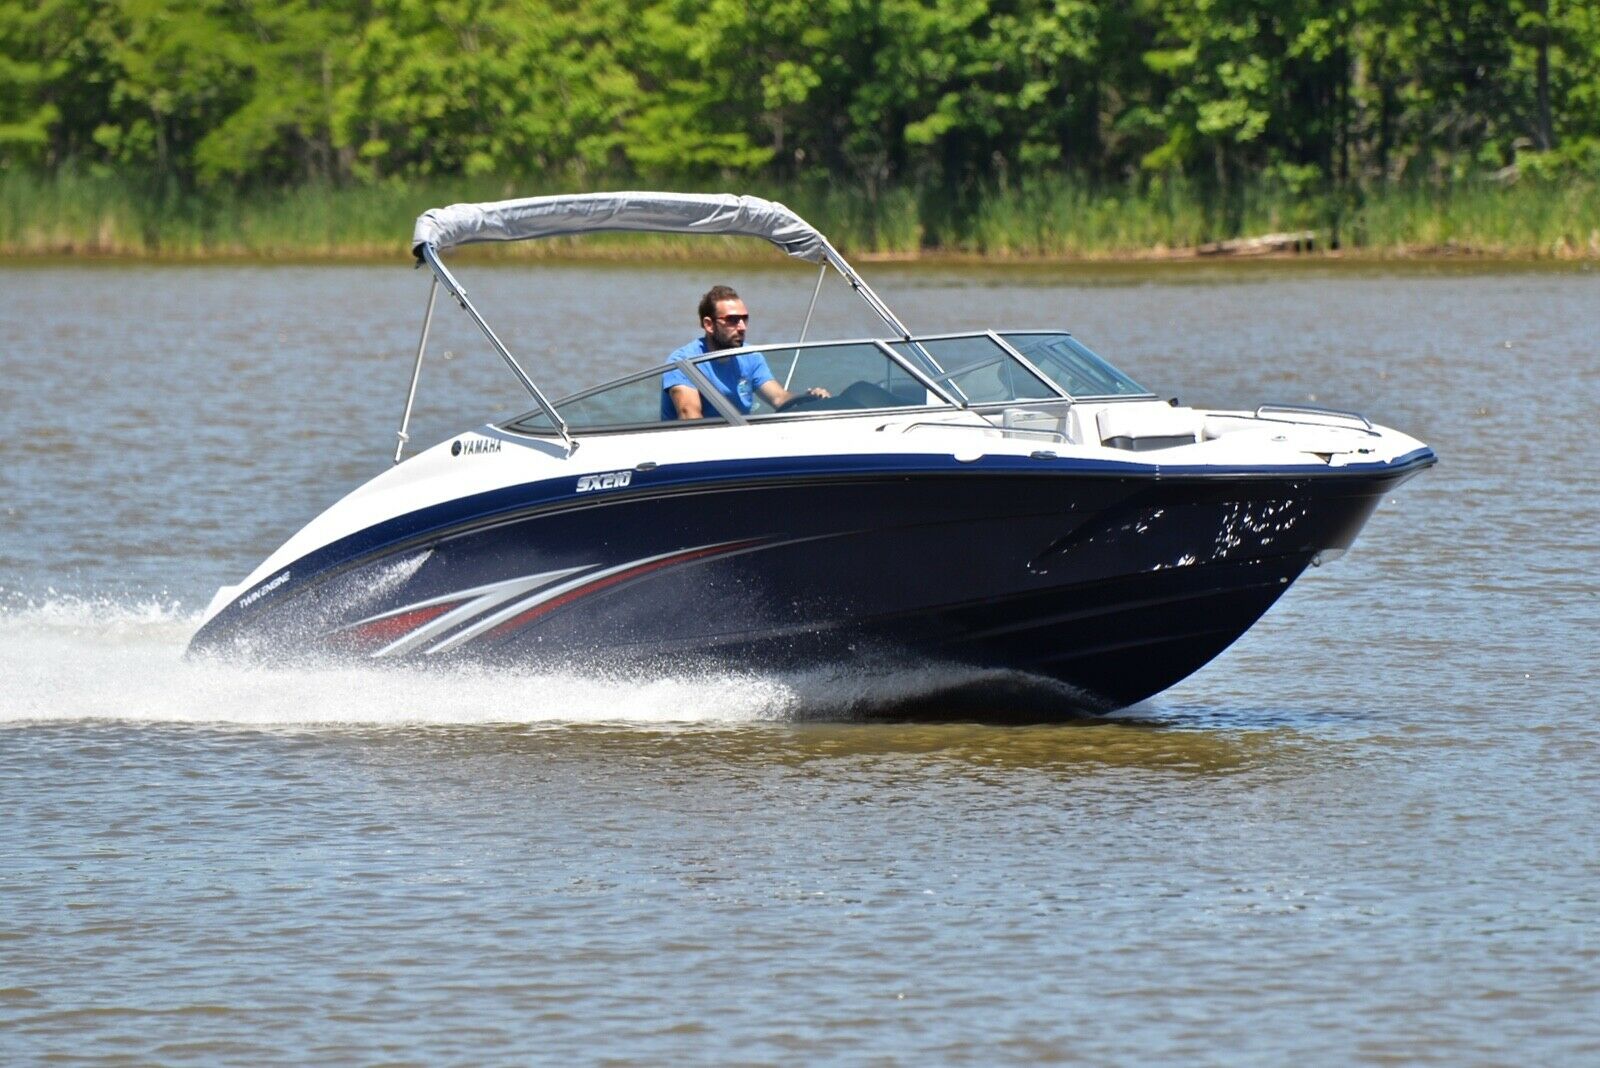 Youare viewing a 2015 Yamaha SX-210 edition jet boat. 